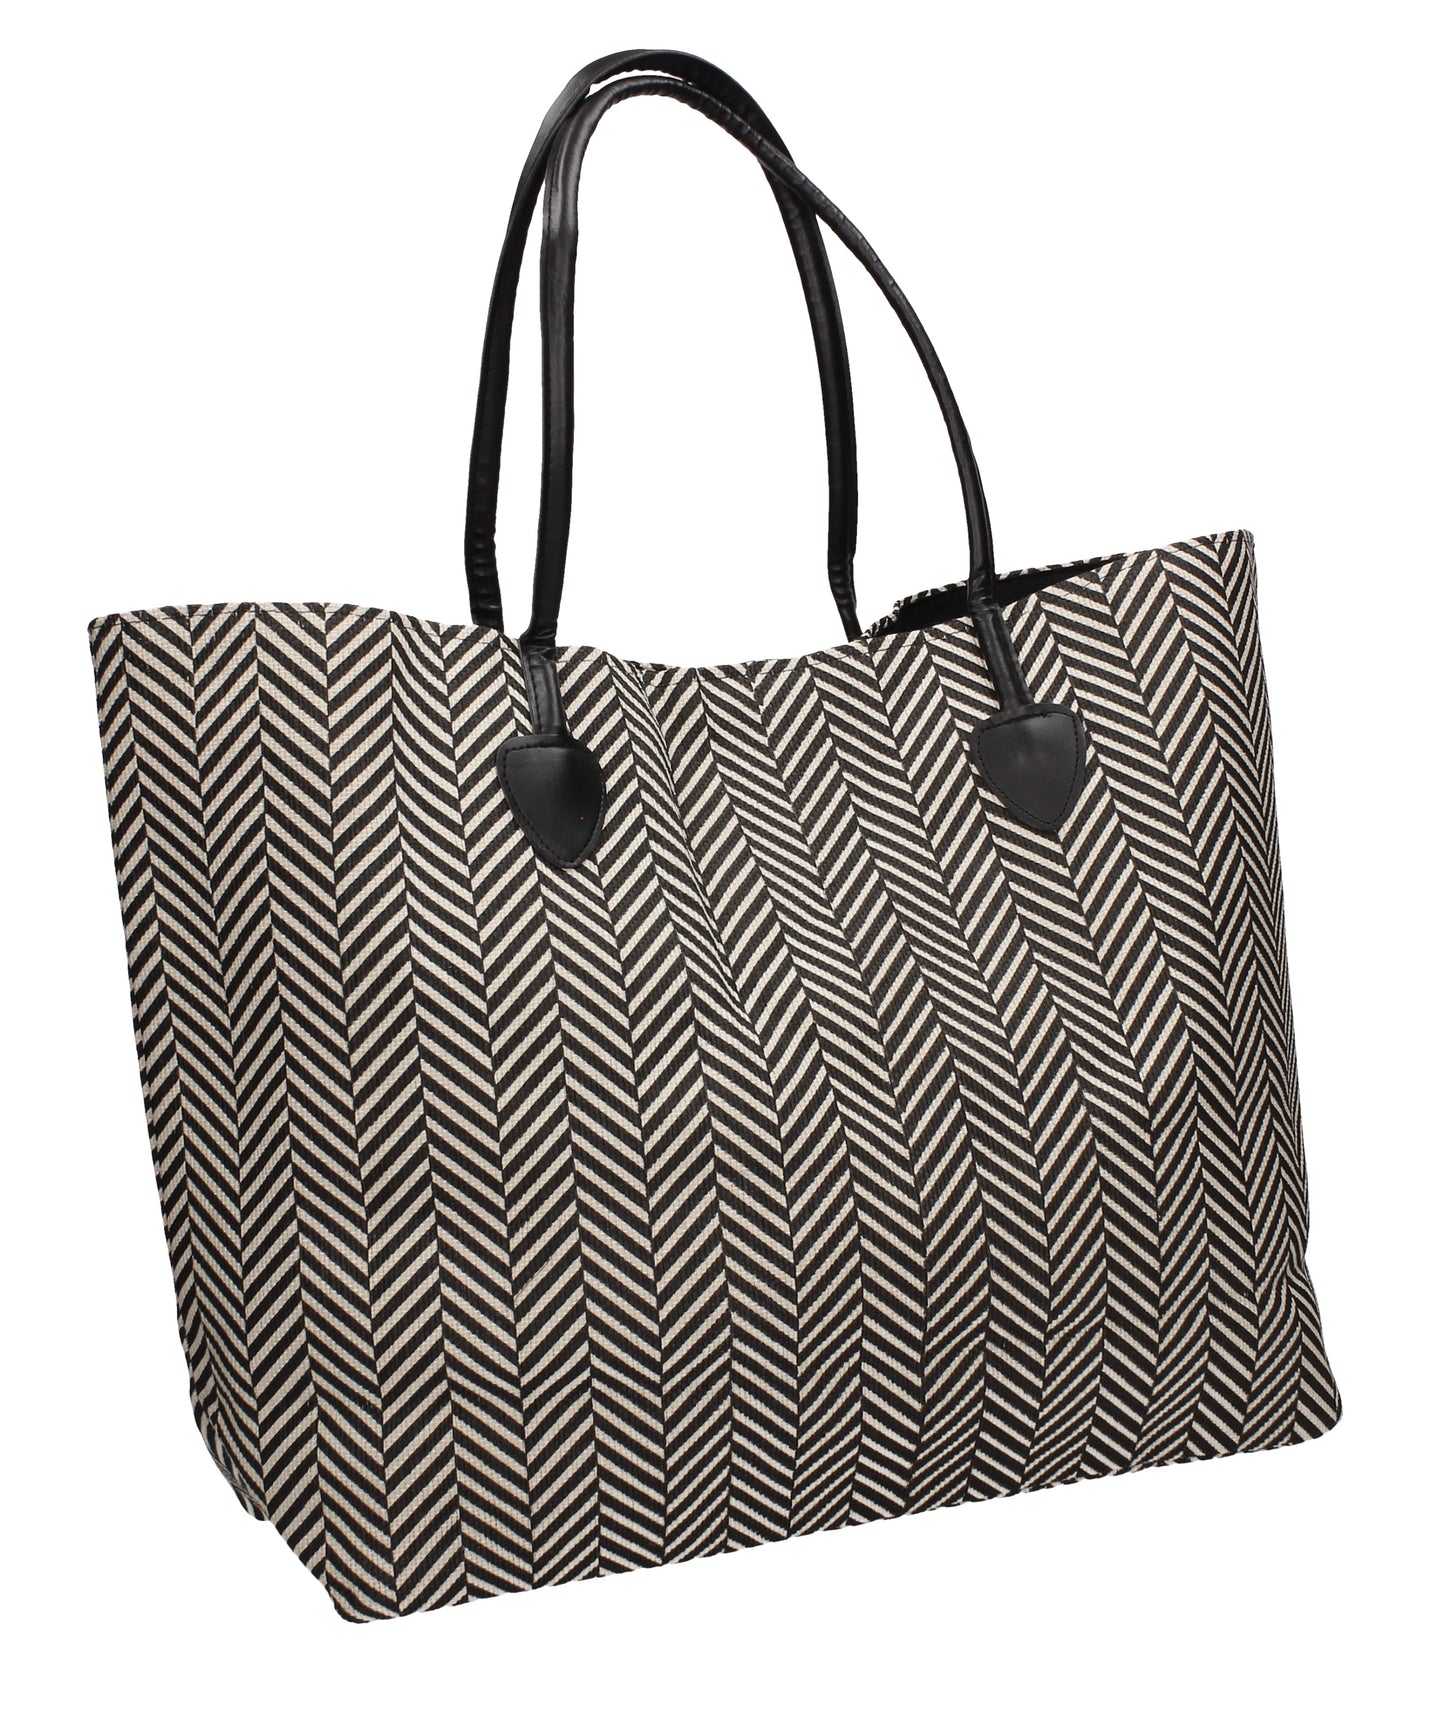 Swanky Swans Wave Print Beach Tote Bag Summer Handbag BlackPerfect for School, Weddings, Day out!